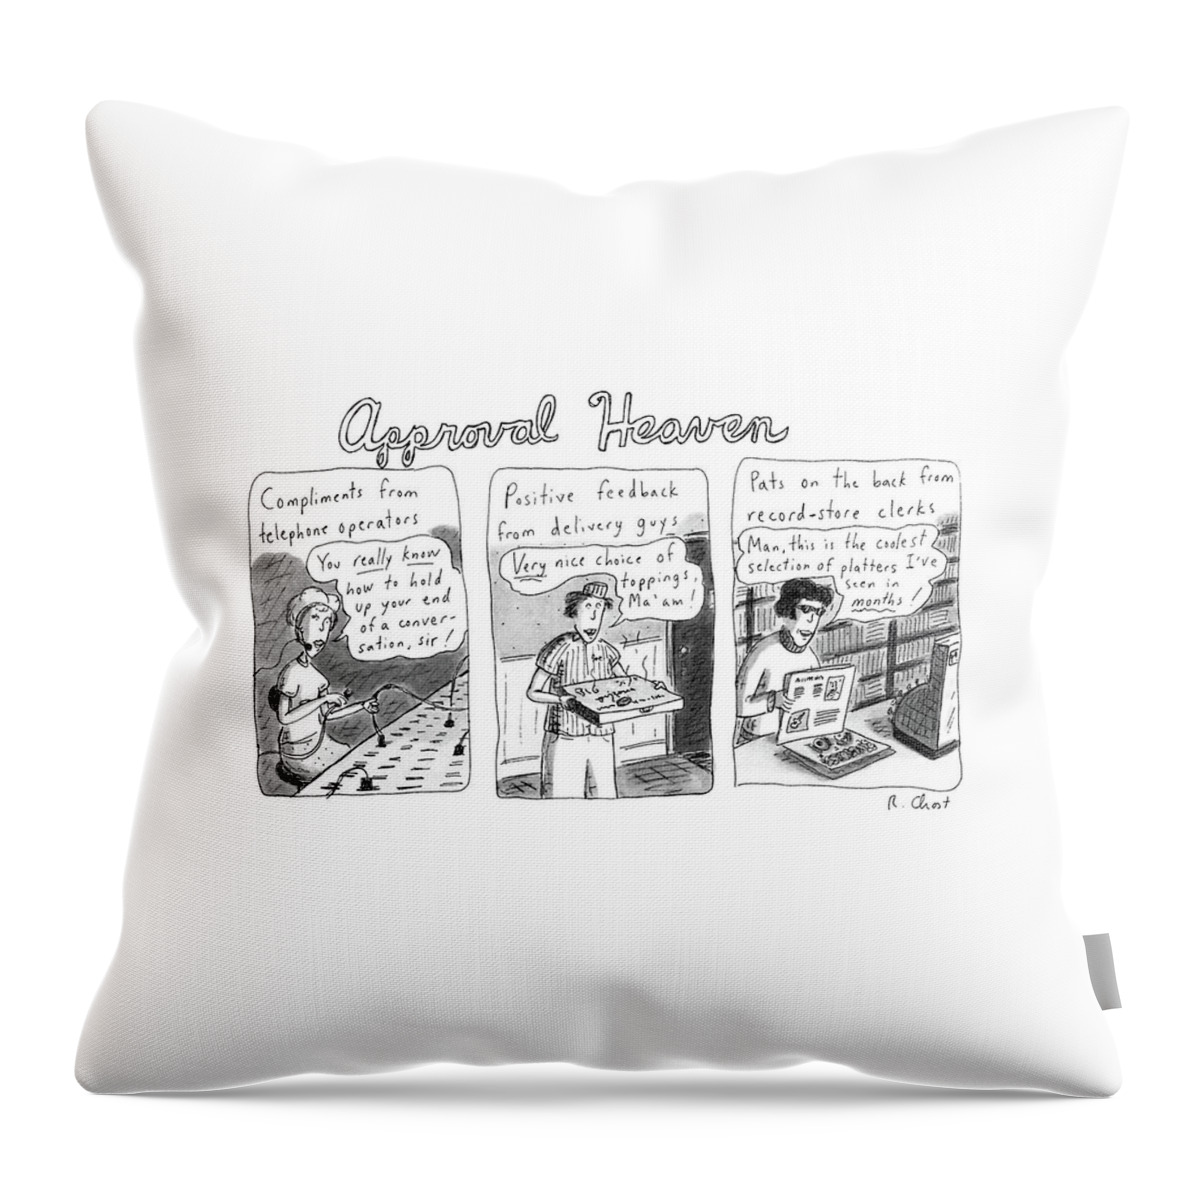 Approval Heaven:
Compliments From Telephone Throw Pillow